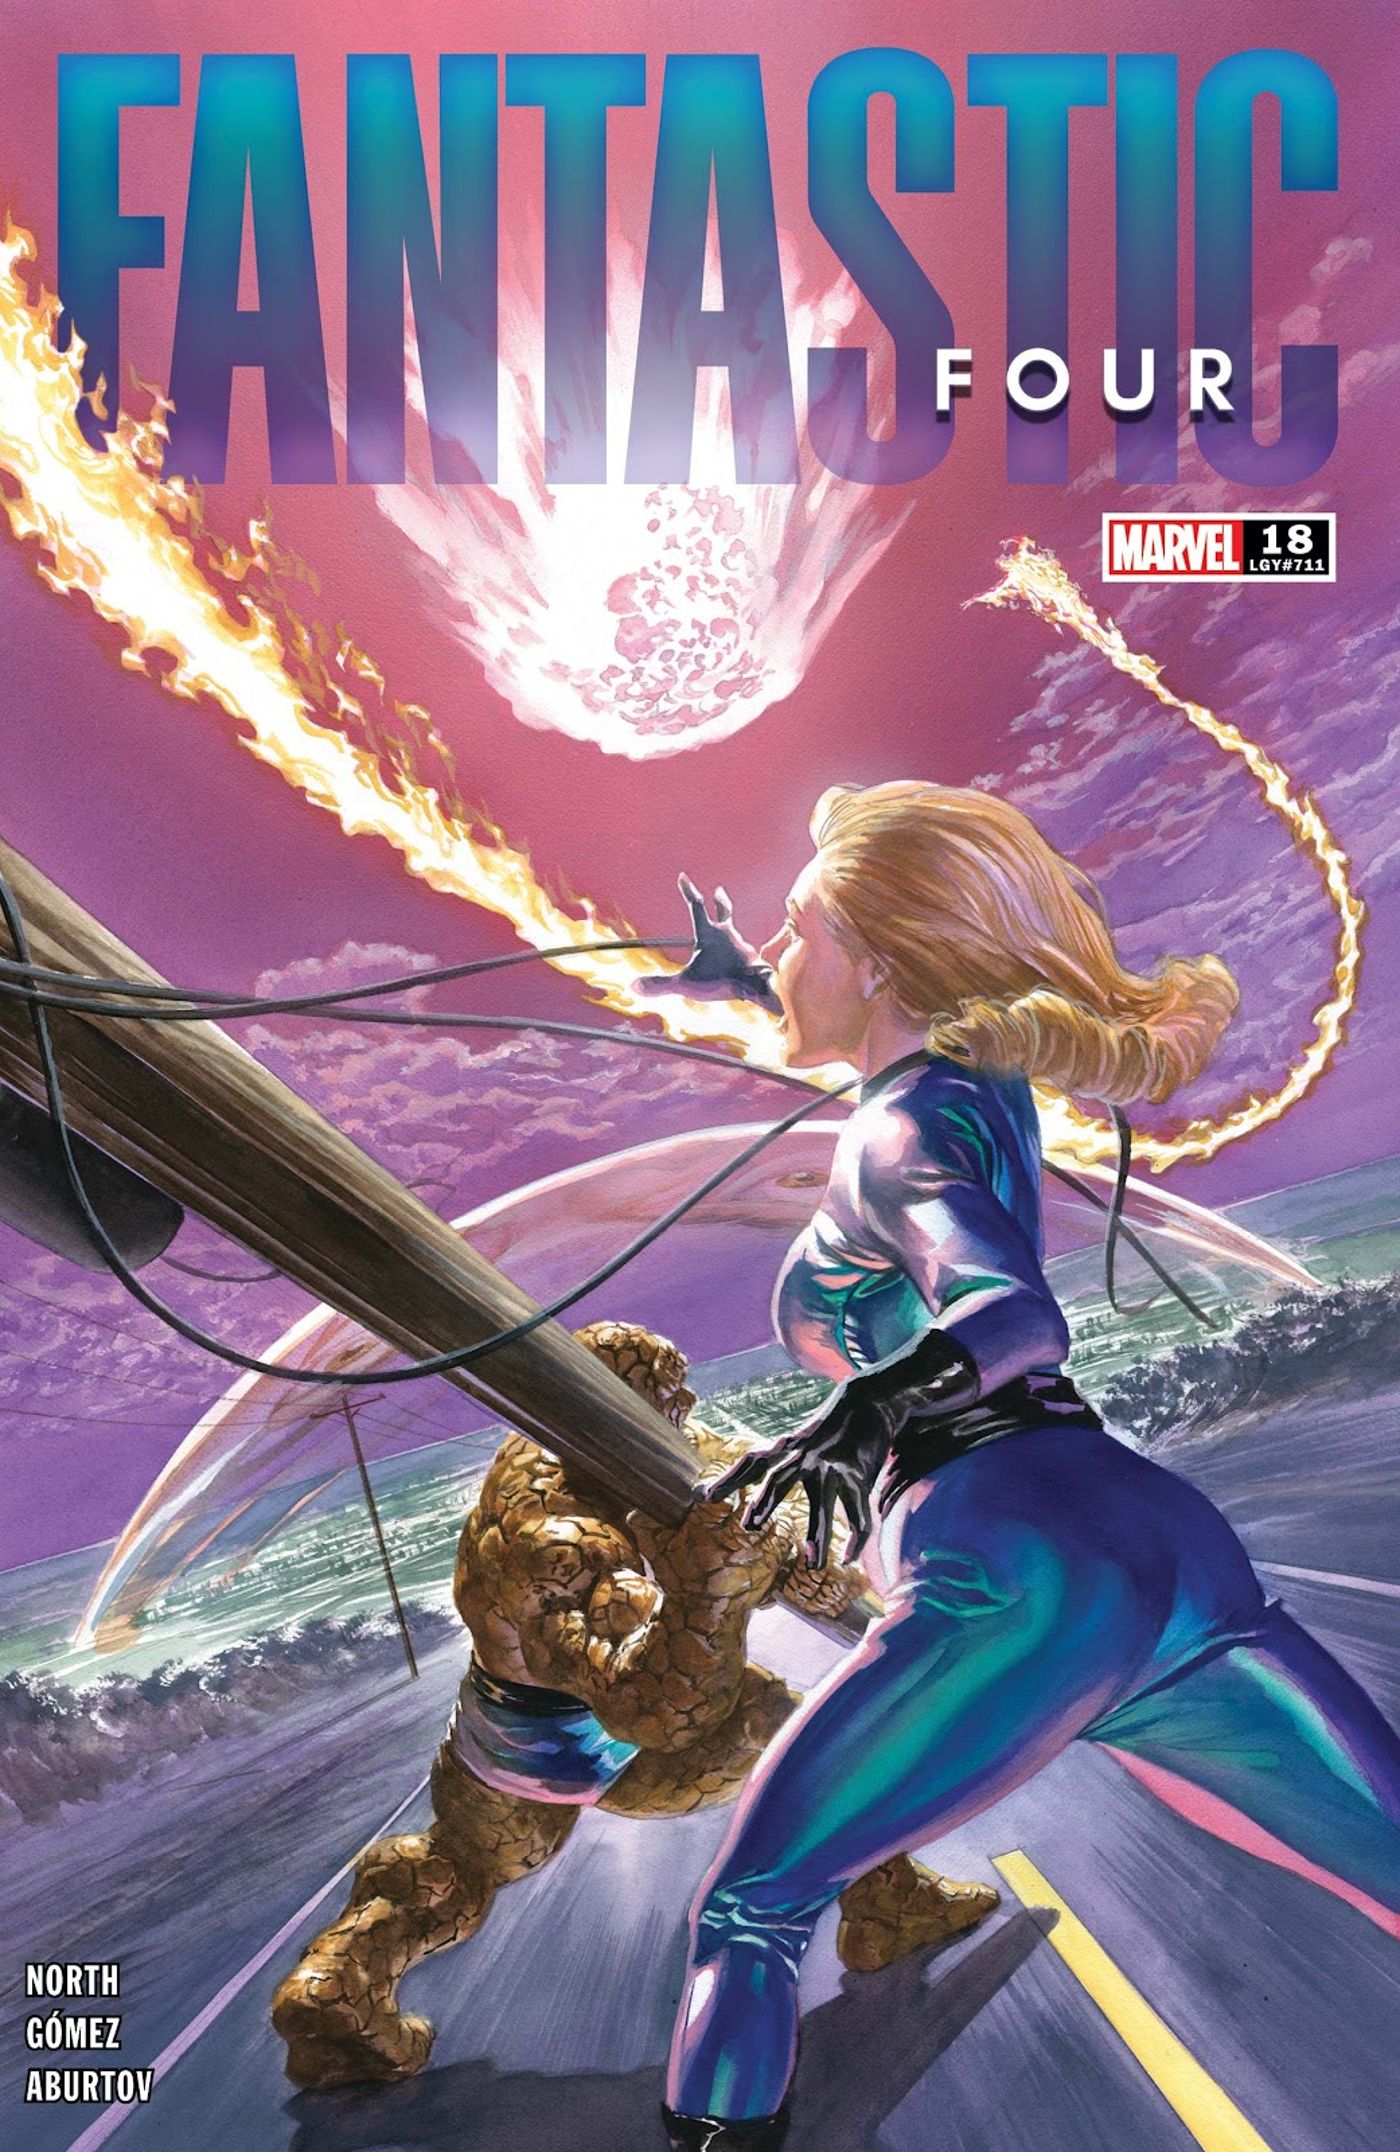 Fantastic Four #18 cover, Invisible Woman reaches toward a flaming asteroid, as The Thing prepares to swing a telephone pole. 